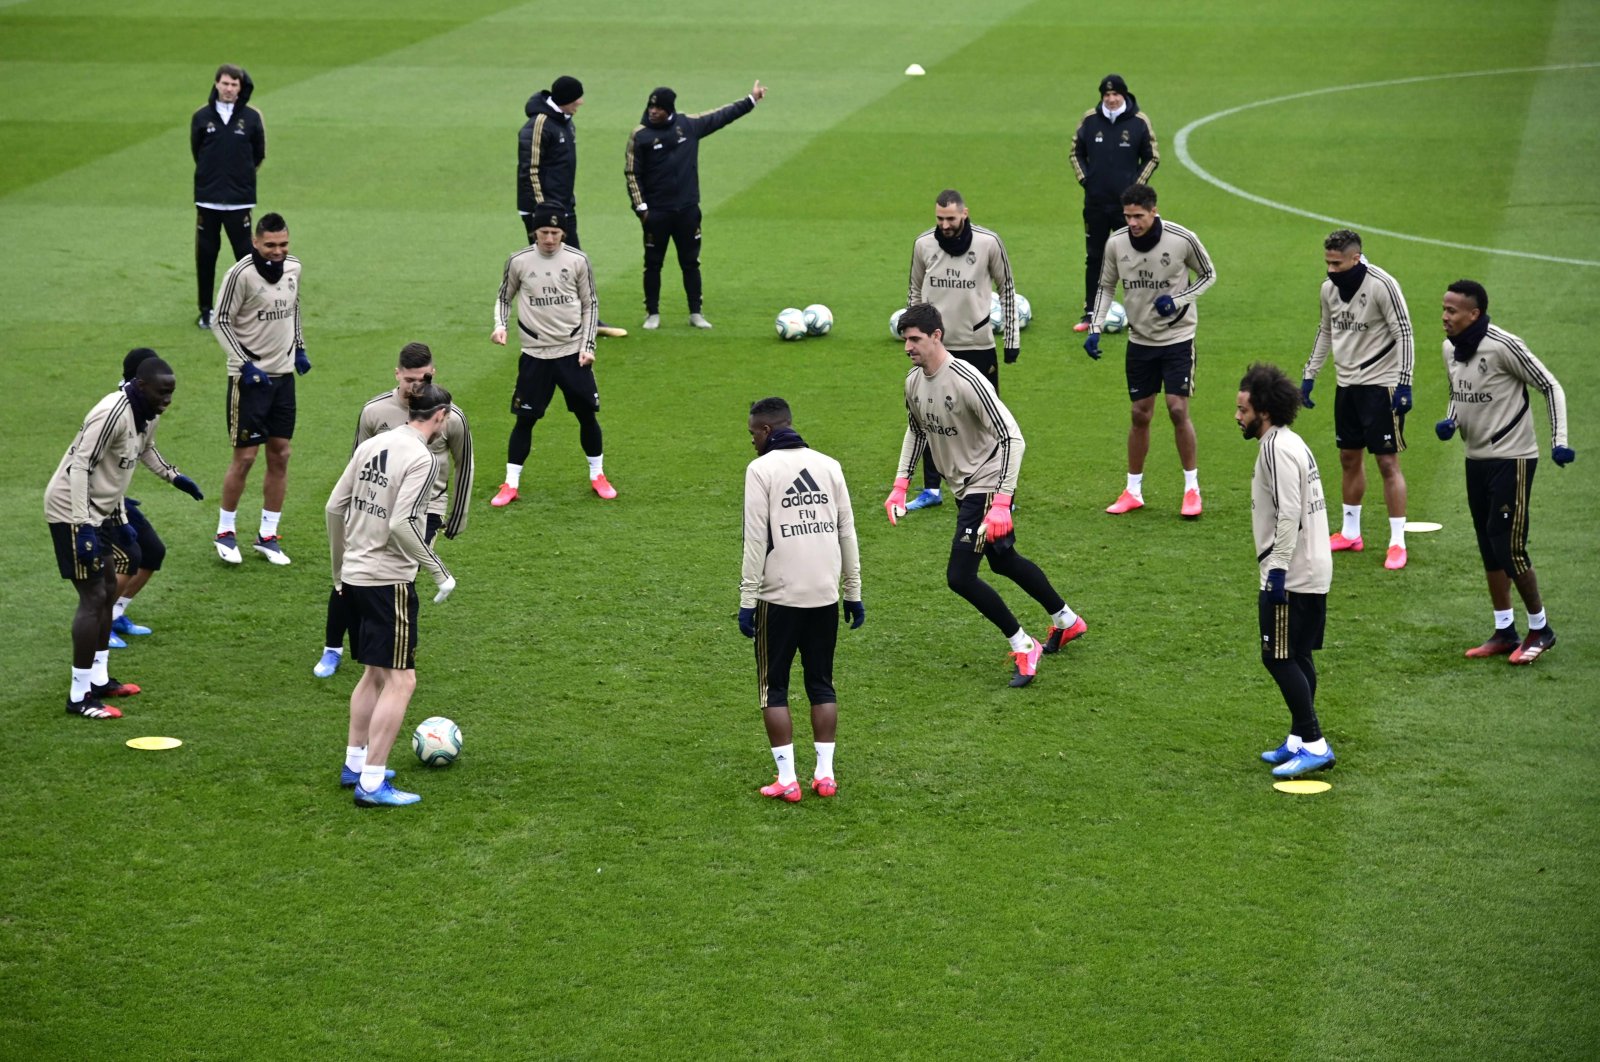 In this file photo taken on February 29, 2020 Real Madrid's players take part in a training session at the club's training ground in Valdebebas in the outskirts of Madrid on February 29, 2020. (AFP Photo)